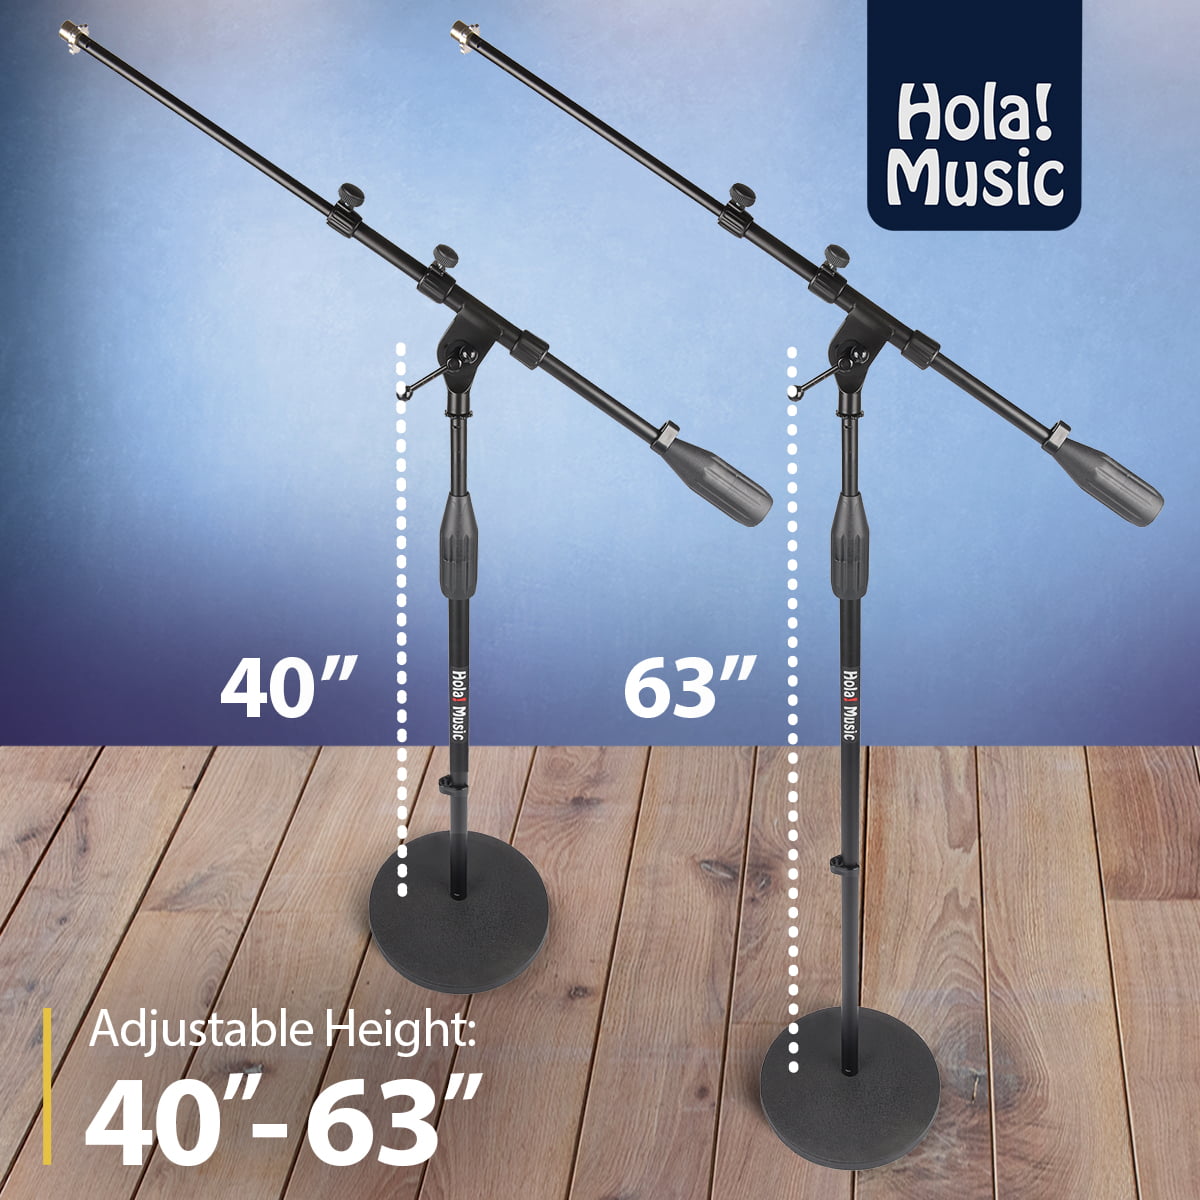 Hola! Music HPS-101RB Professional Microphone Boom Mic Stand with 